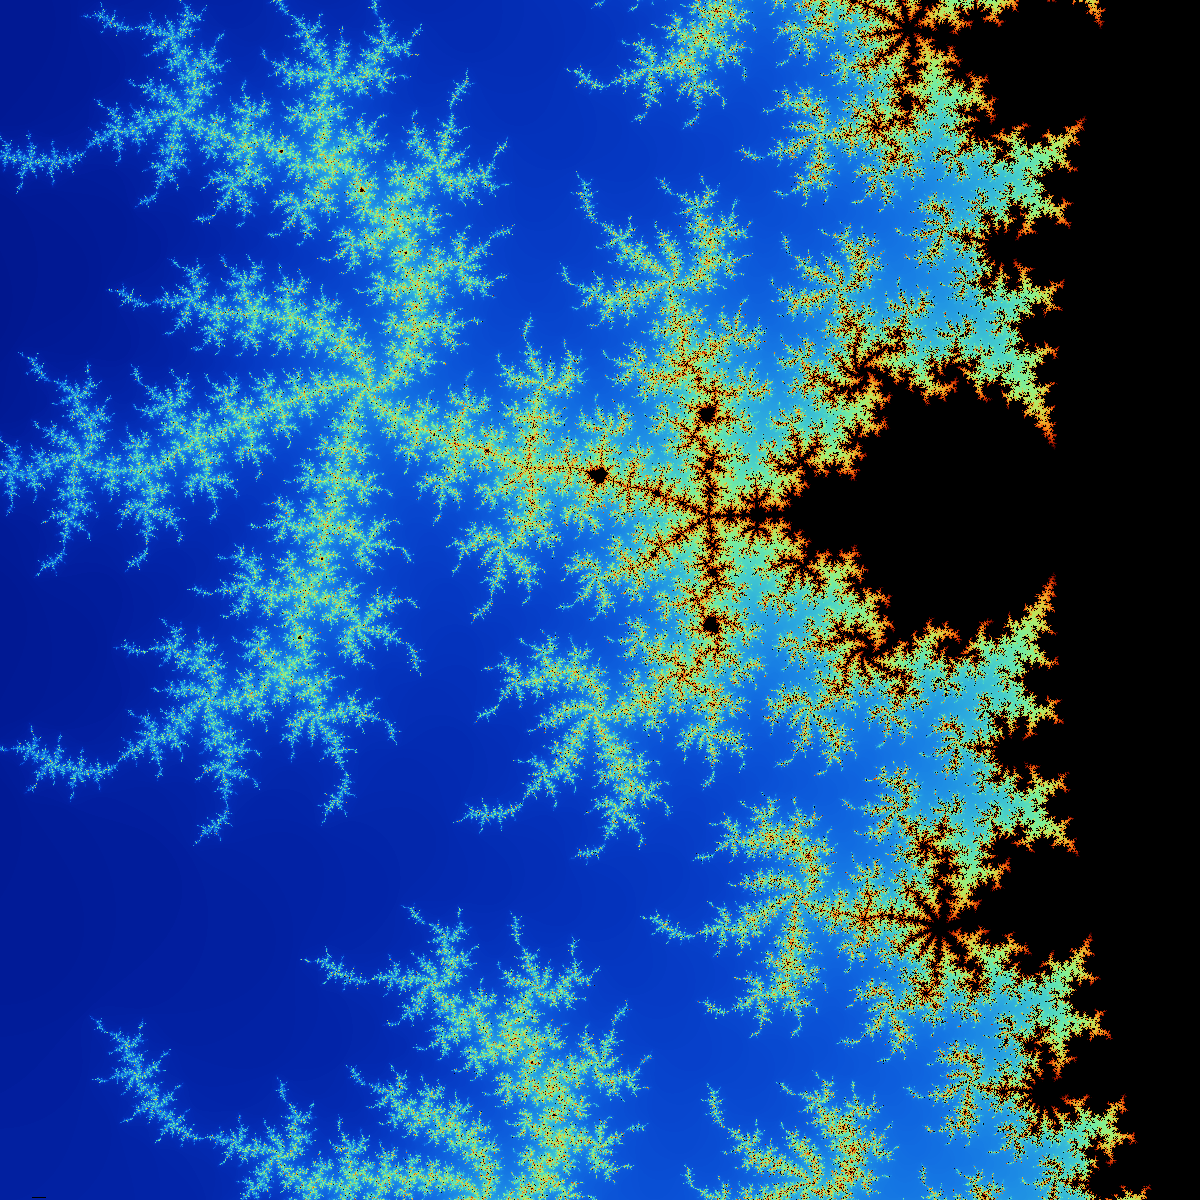 Mandelbrot set zoom in smooth colors